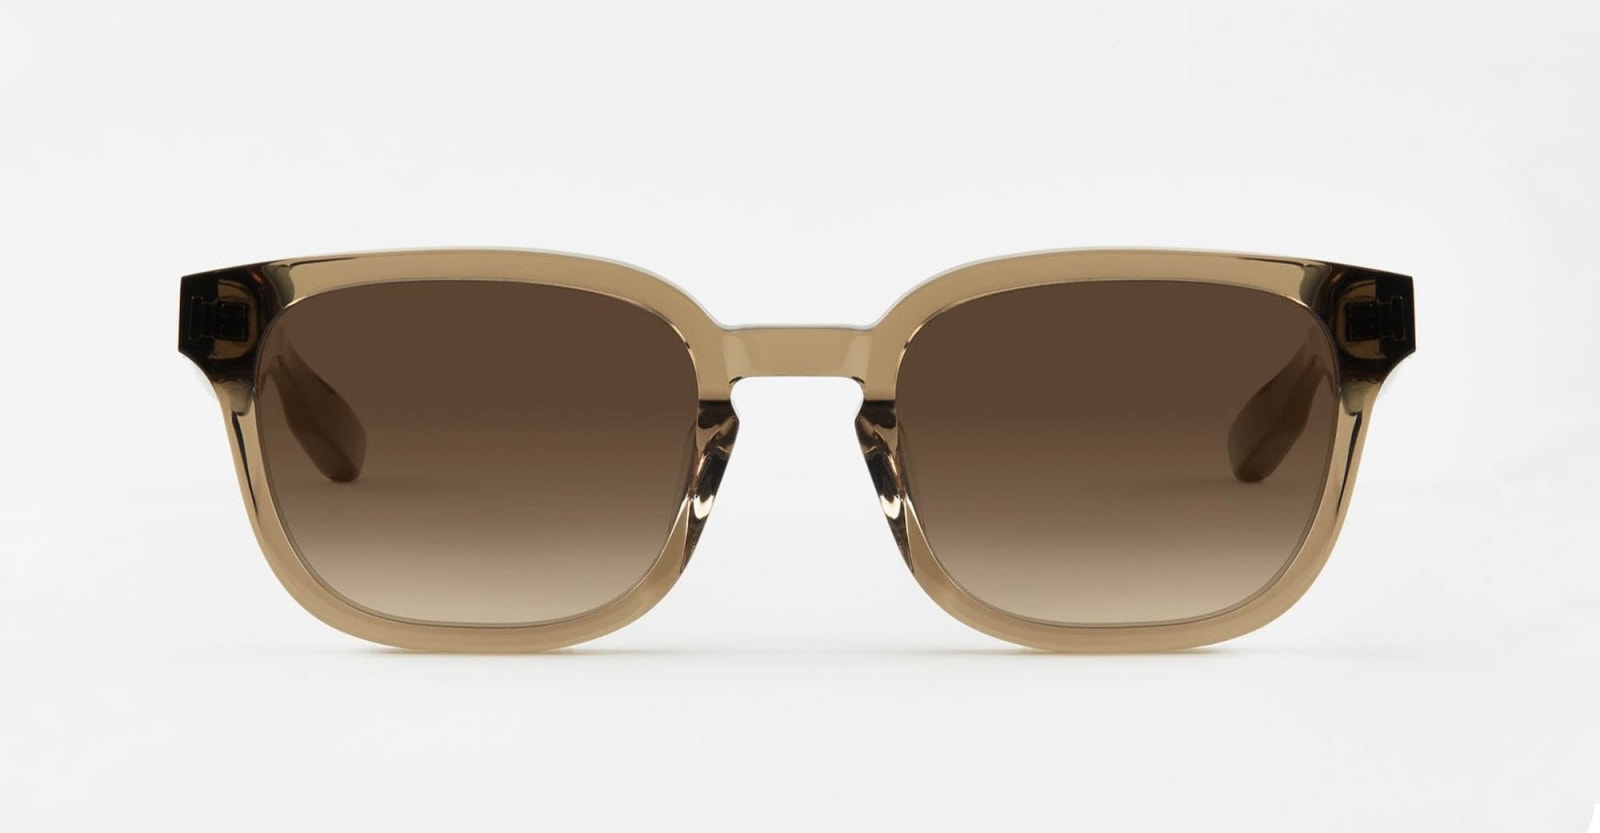 Aether Model S1 - Smoke Brown Sunglasses